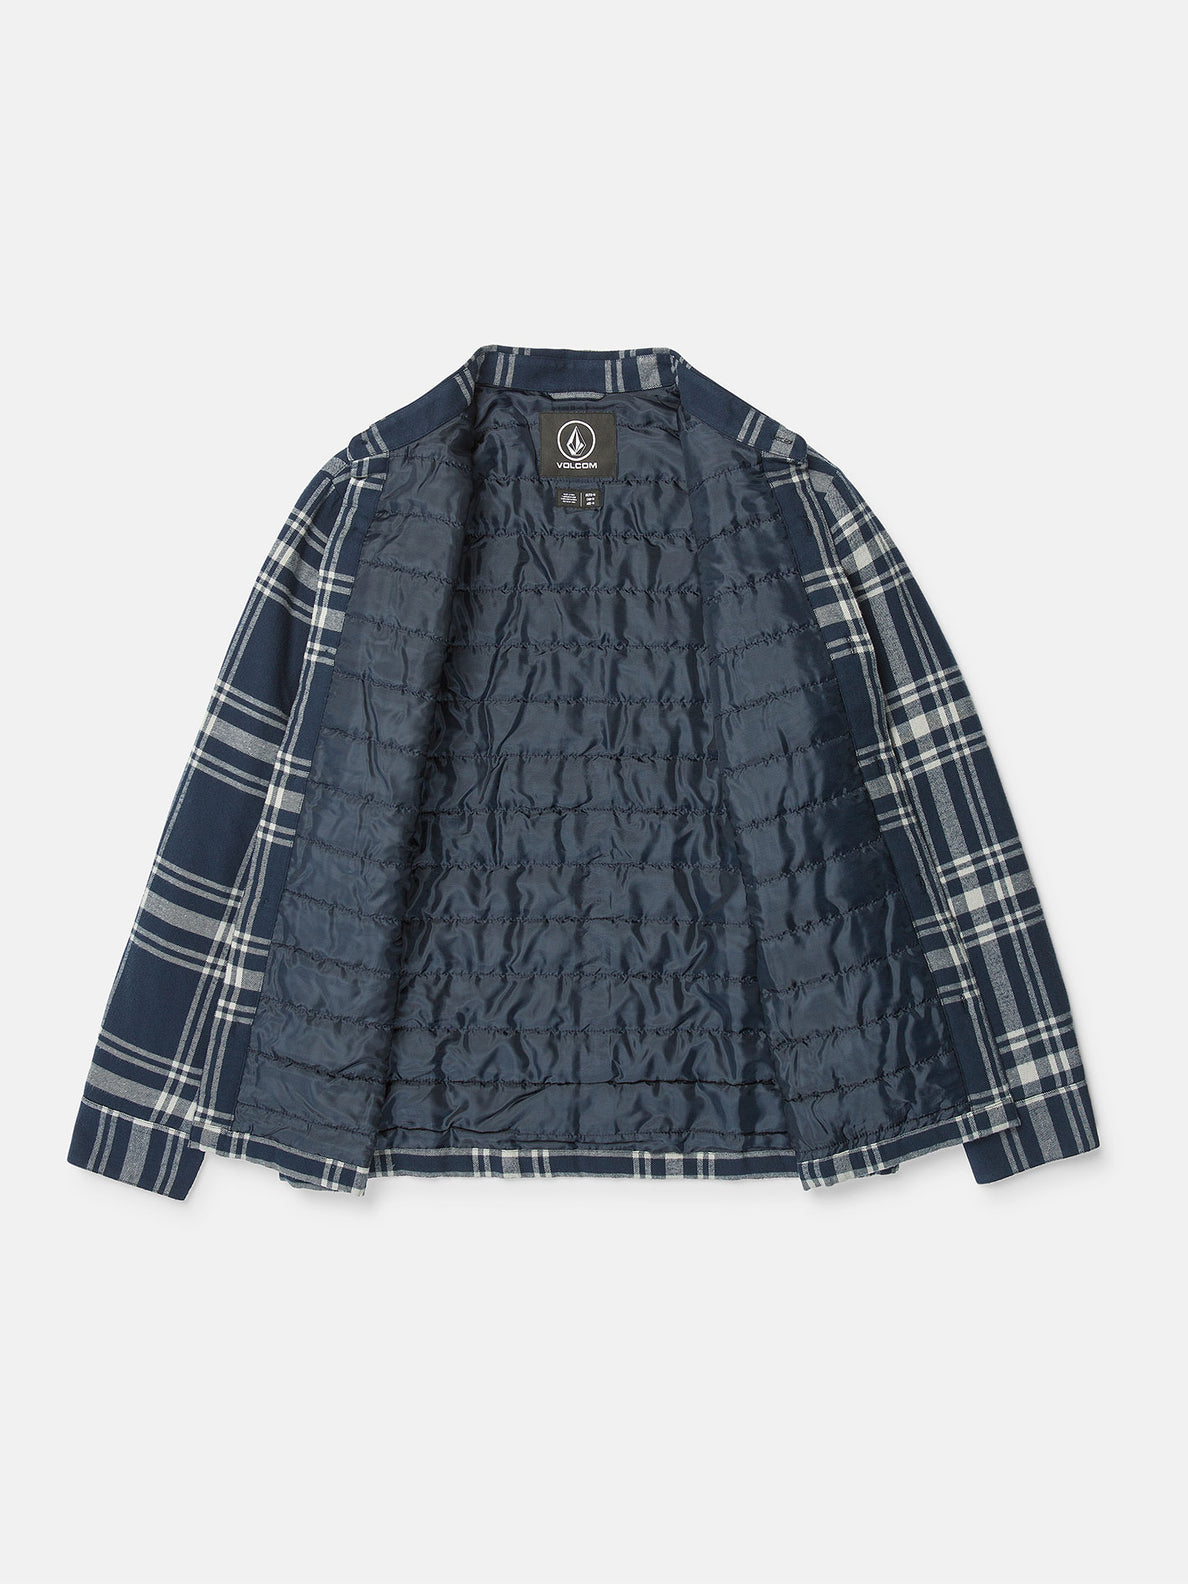 Northport Lined Long Sleeve Flannel - Navy